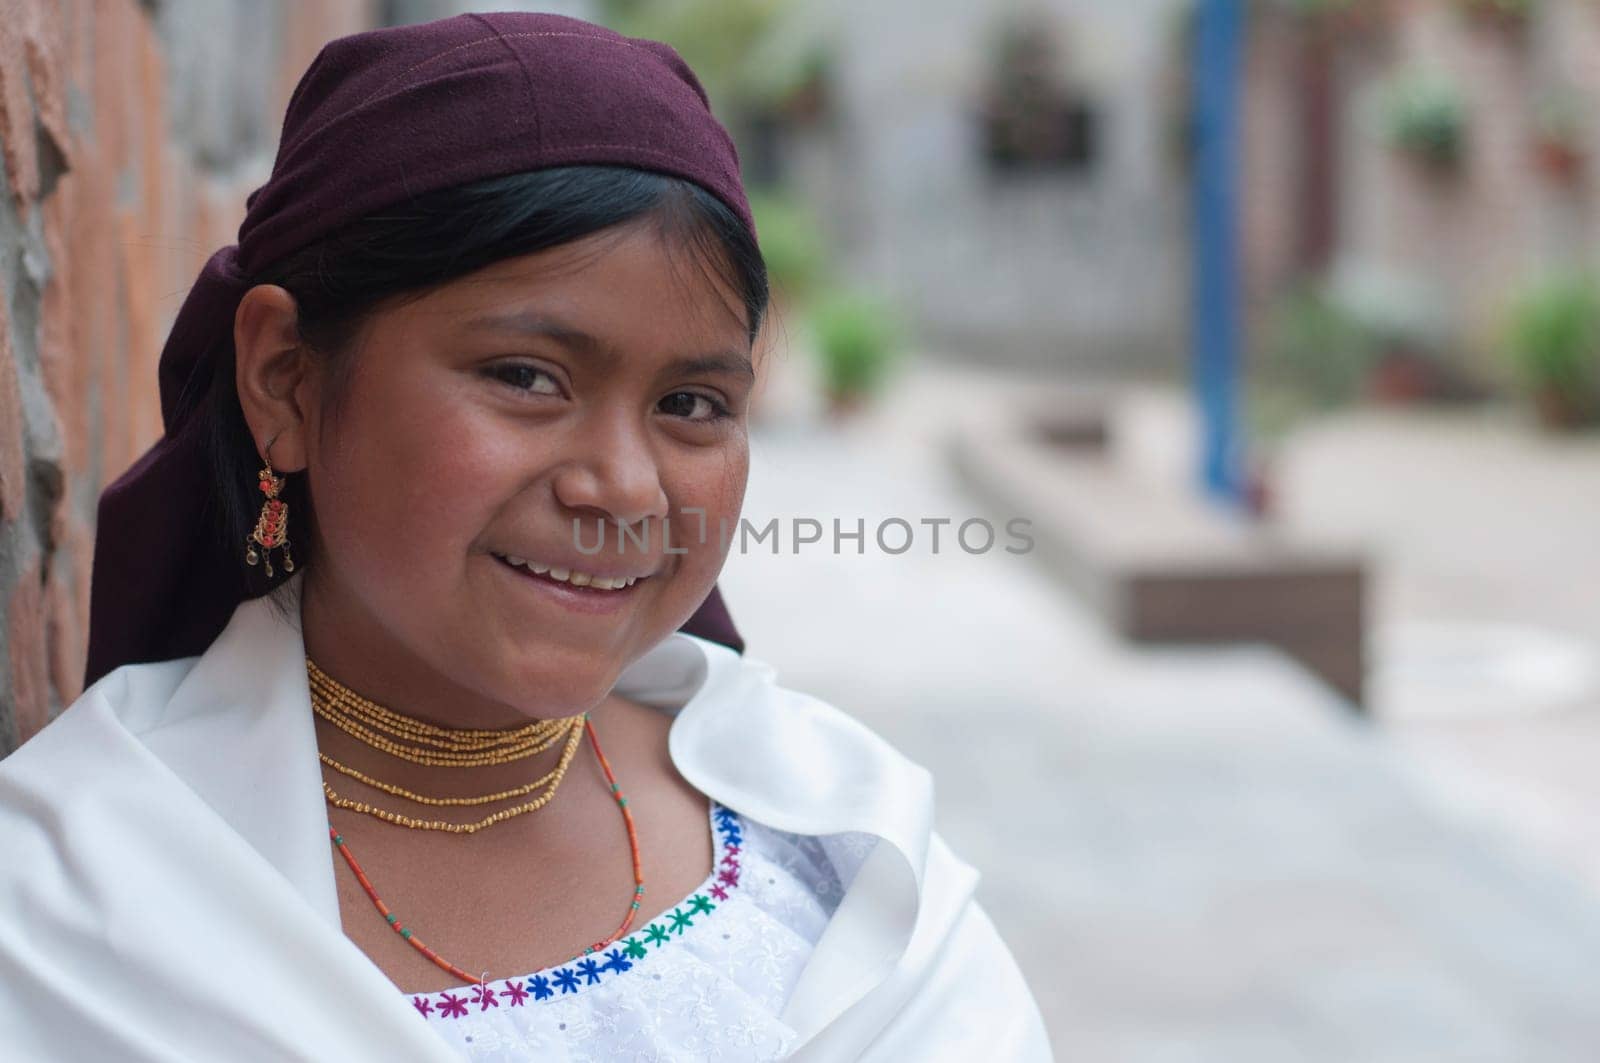 A young indigenous girl wearing traditional dress including a headscarf and jewelry smiles warmly while leaning against a brick wall in a cobblestone alley. by Raulmartin